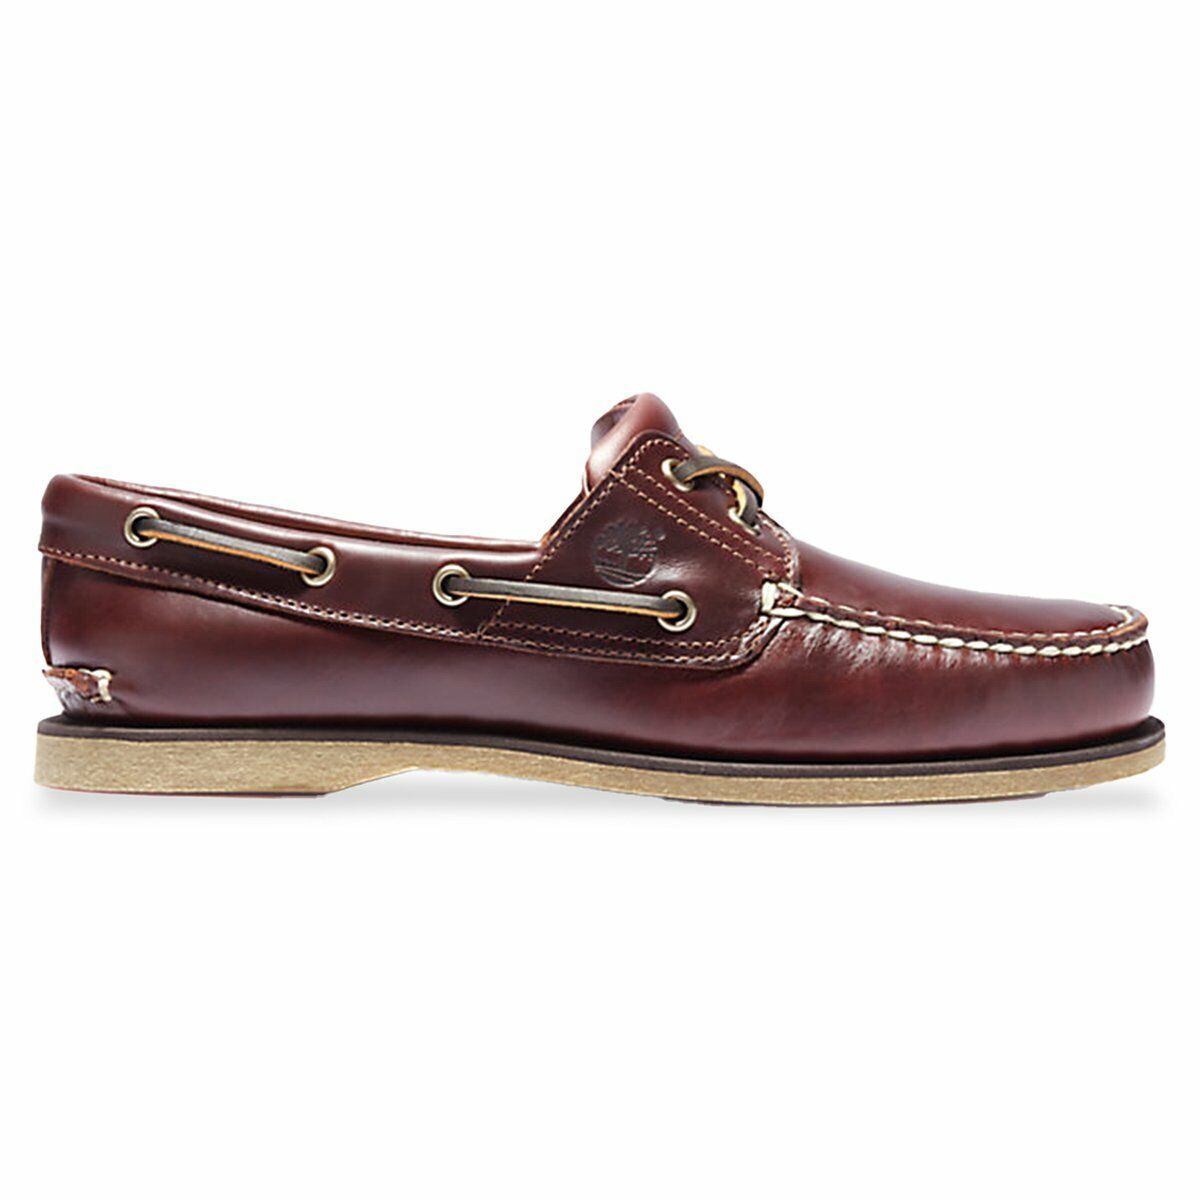 Timberland Men's Shoes Timberland Classic Boat Shoes - Brown, Nubuck | eBay